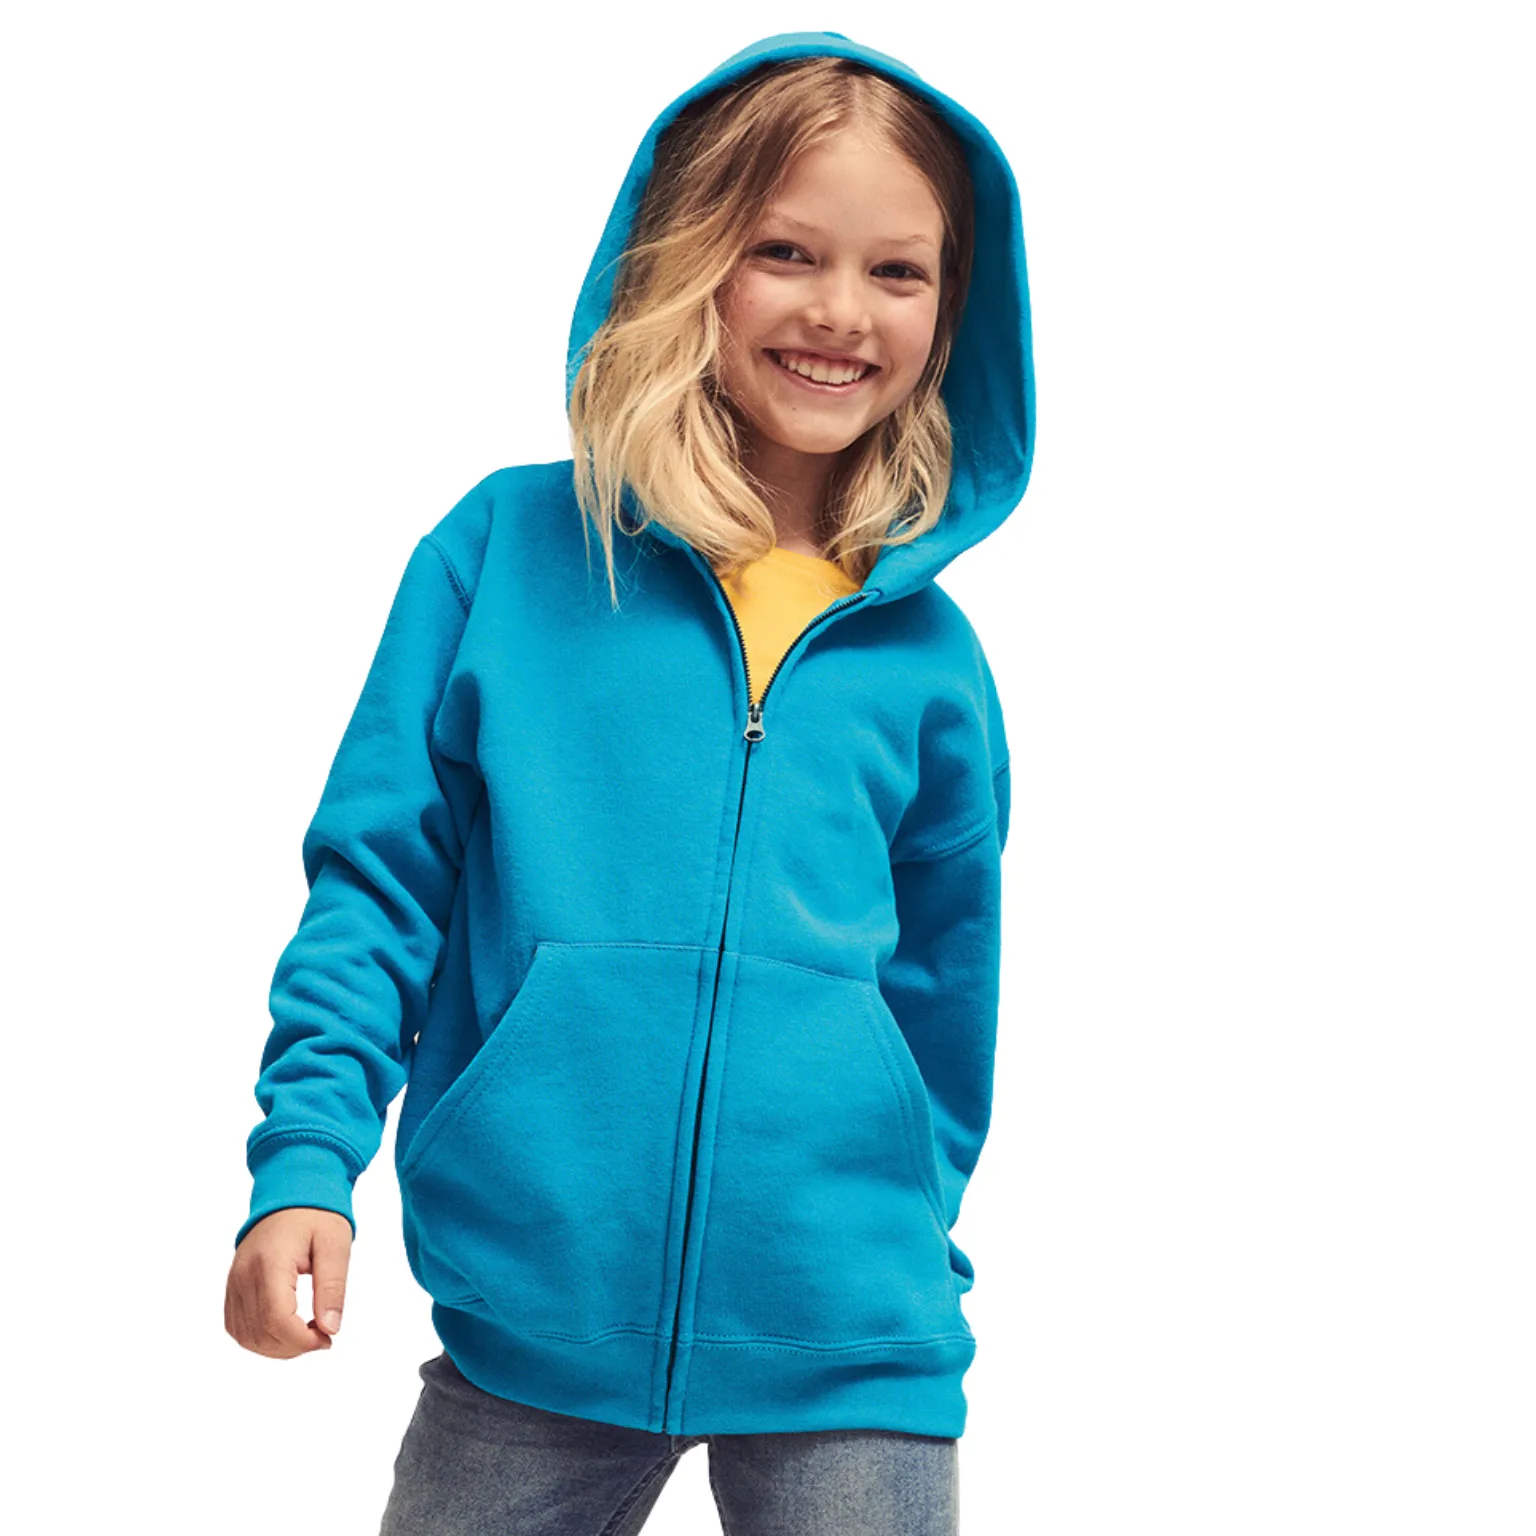 Kids Cotton Jackets manufacturing with trendy design